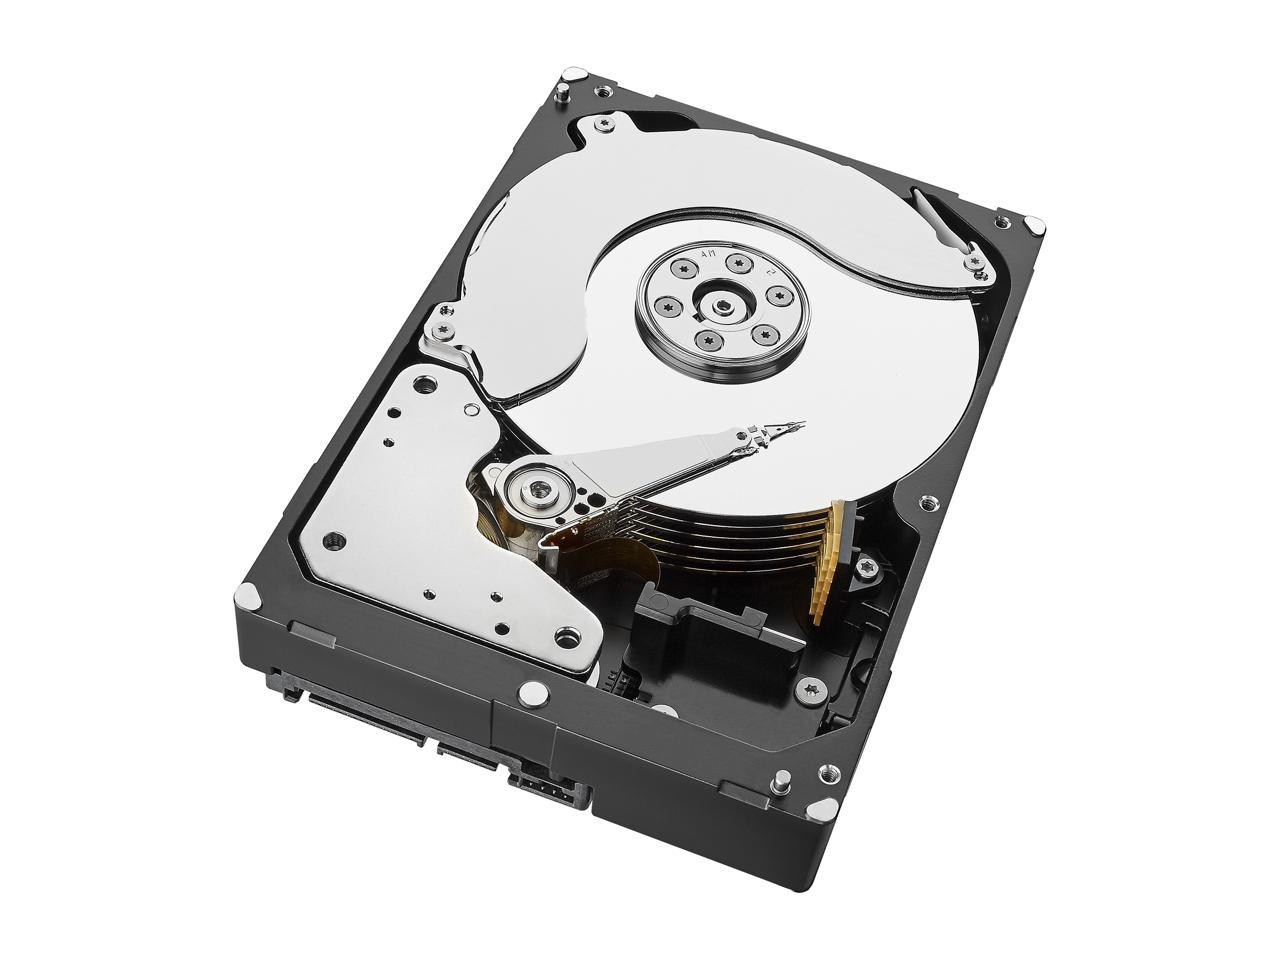 Seagate IronWolf Pro, 8 TB, Enterprise NAS Internal HDD –CMR 3.5 Inch, SATA  6 Gb/s, 7,200 RPM, 256 MB Cache for RAID Network Attached Storage